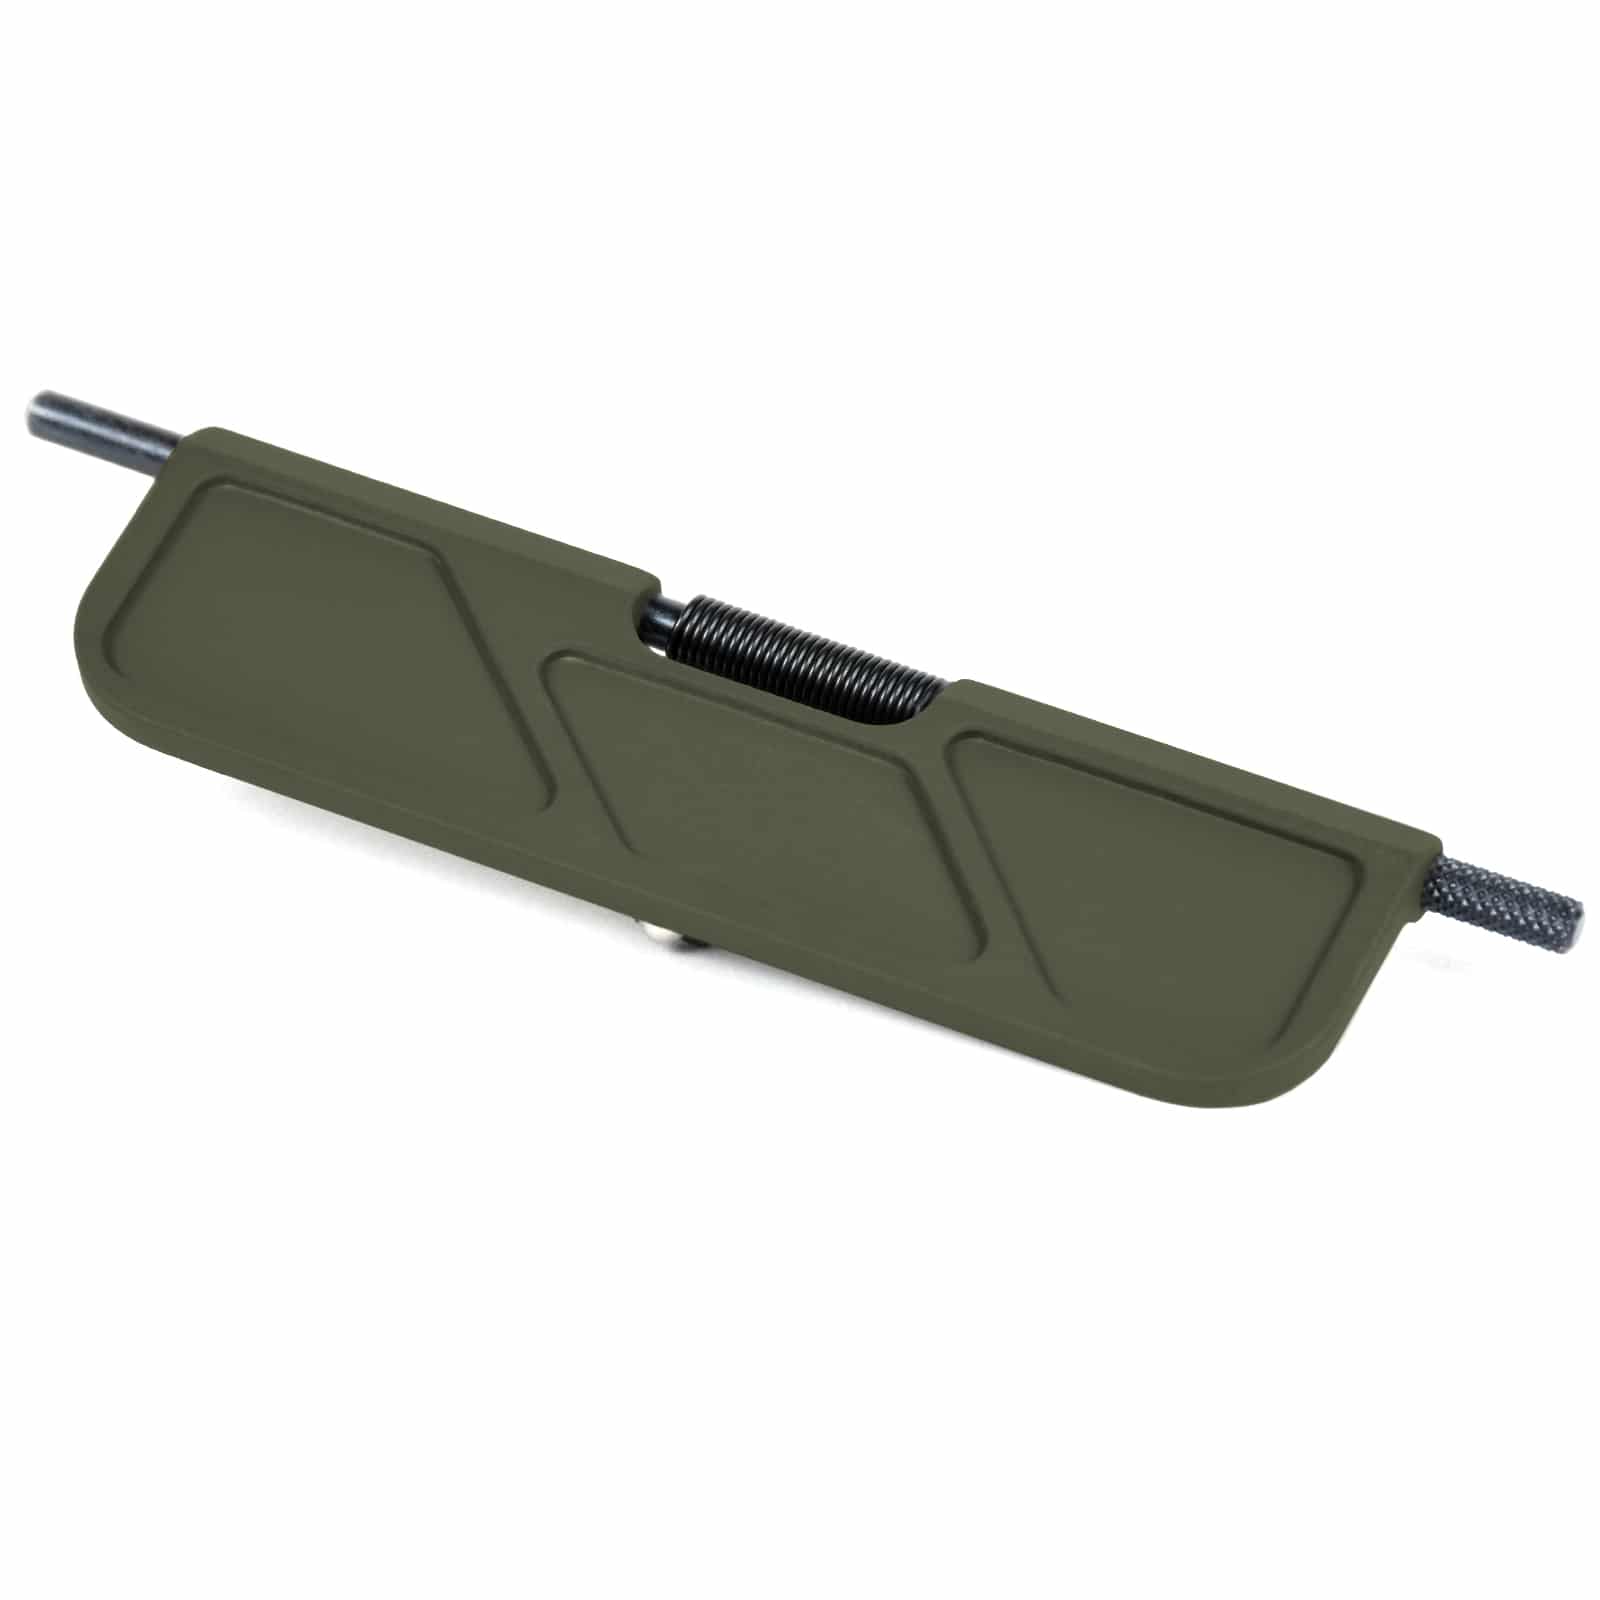 Timber Creek Outdoors Billet Dust Cover - OD Green